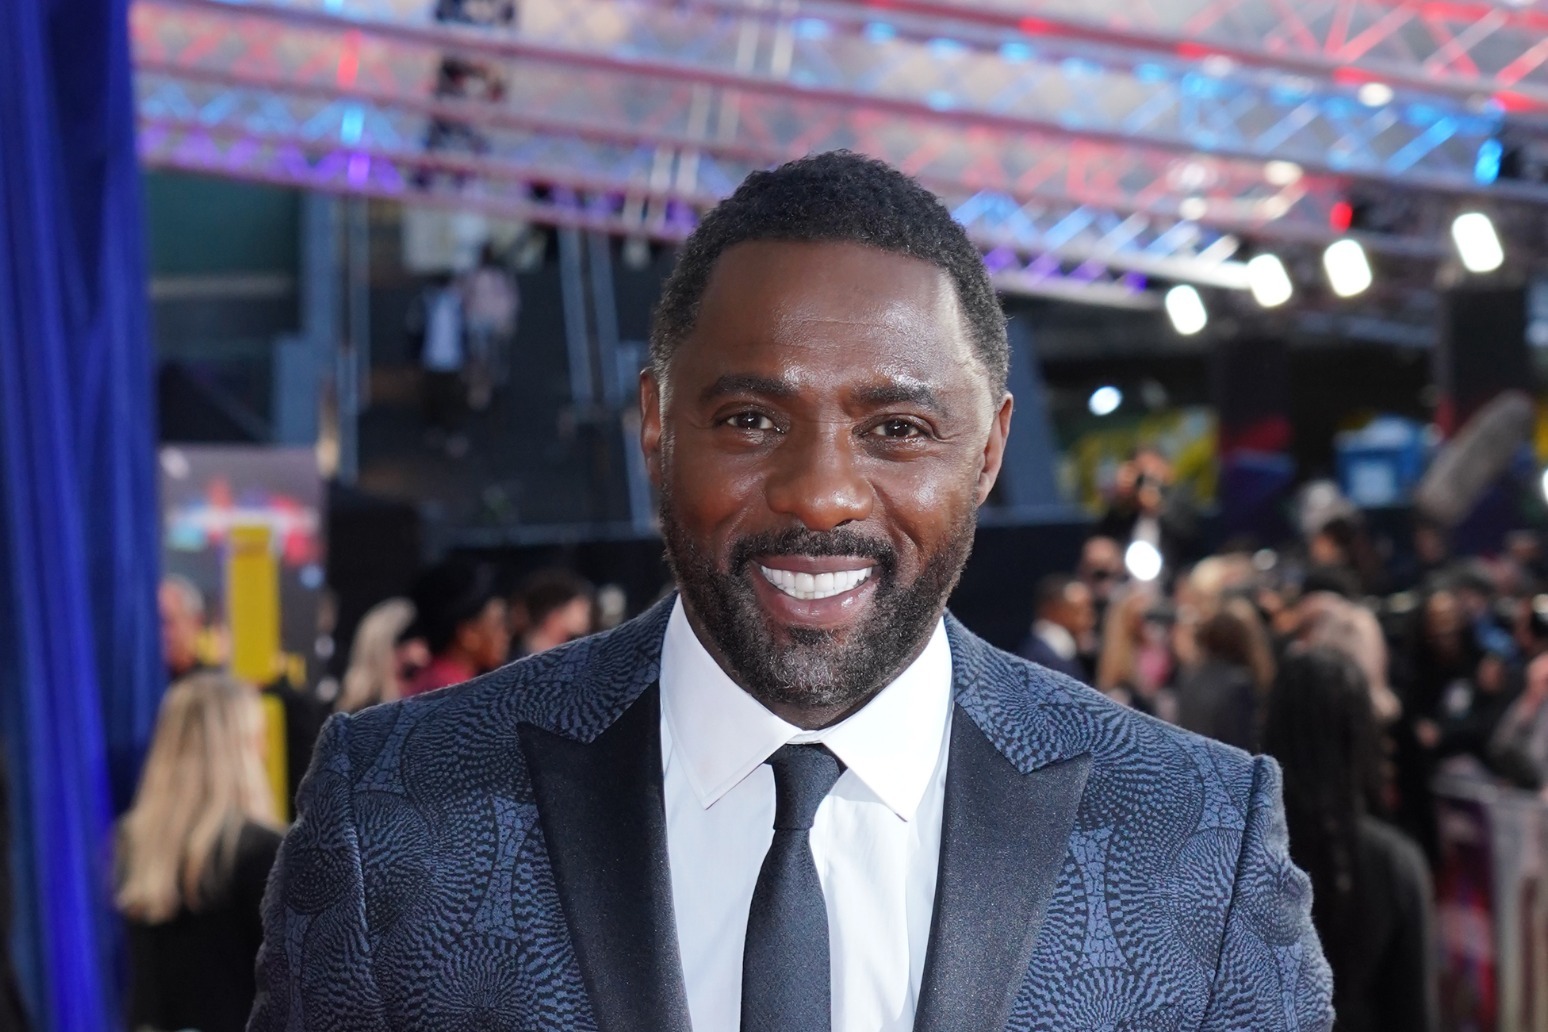 It’s important to use my voice in the fight against knife crime, says Idris Elba 